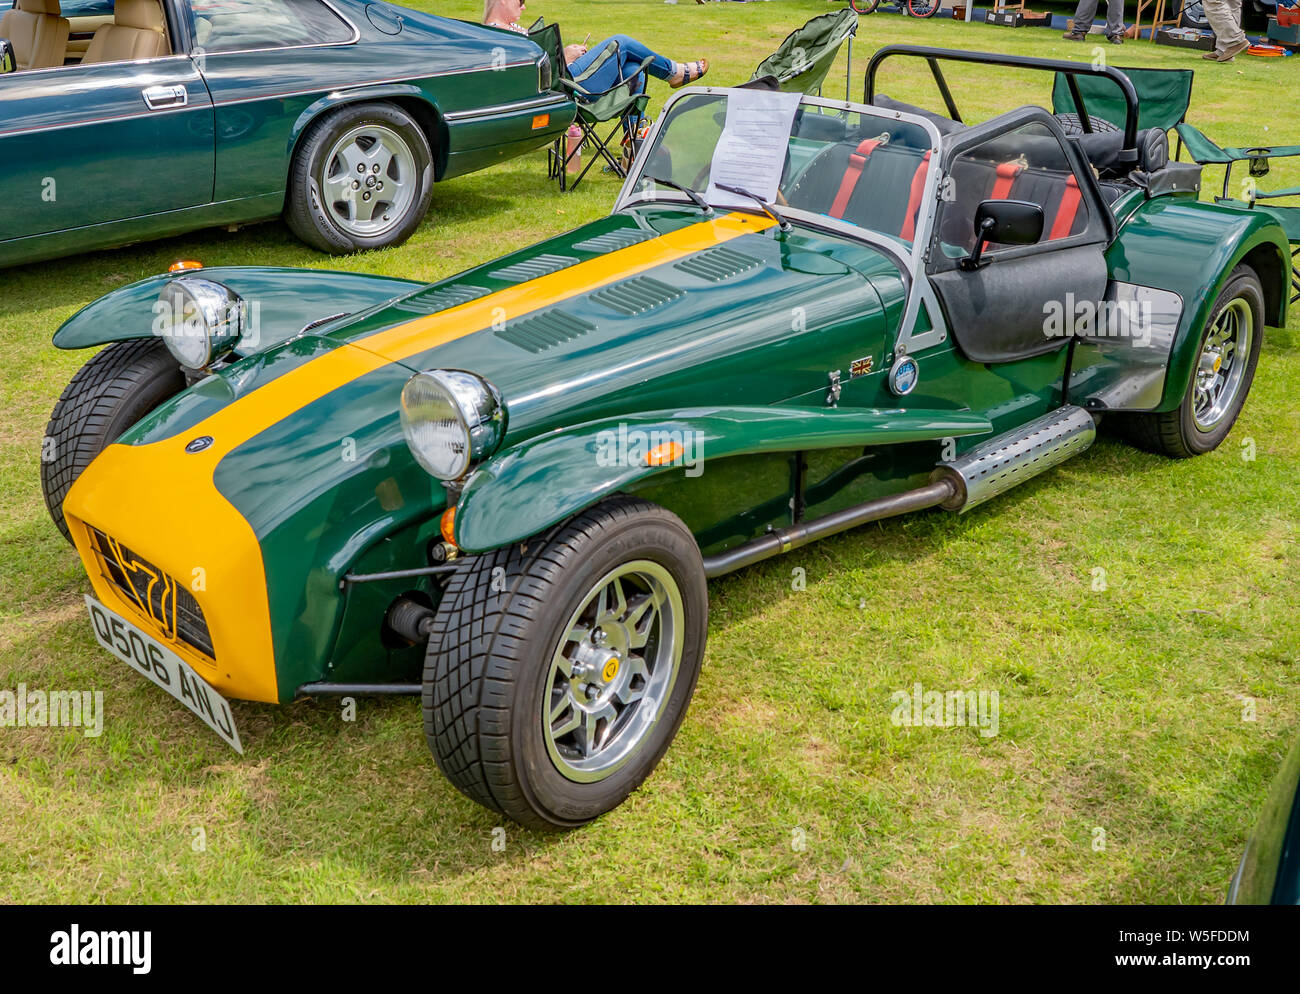 Side on view of a classic Lotus 7 kit car in British racing green and yellow on display at the annual classic car show in Wroxham, Norfolk, UK Stock Photo